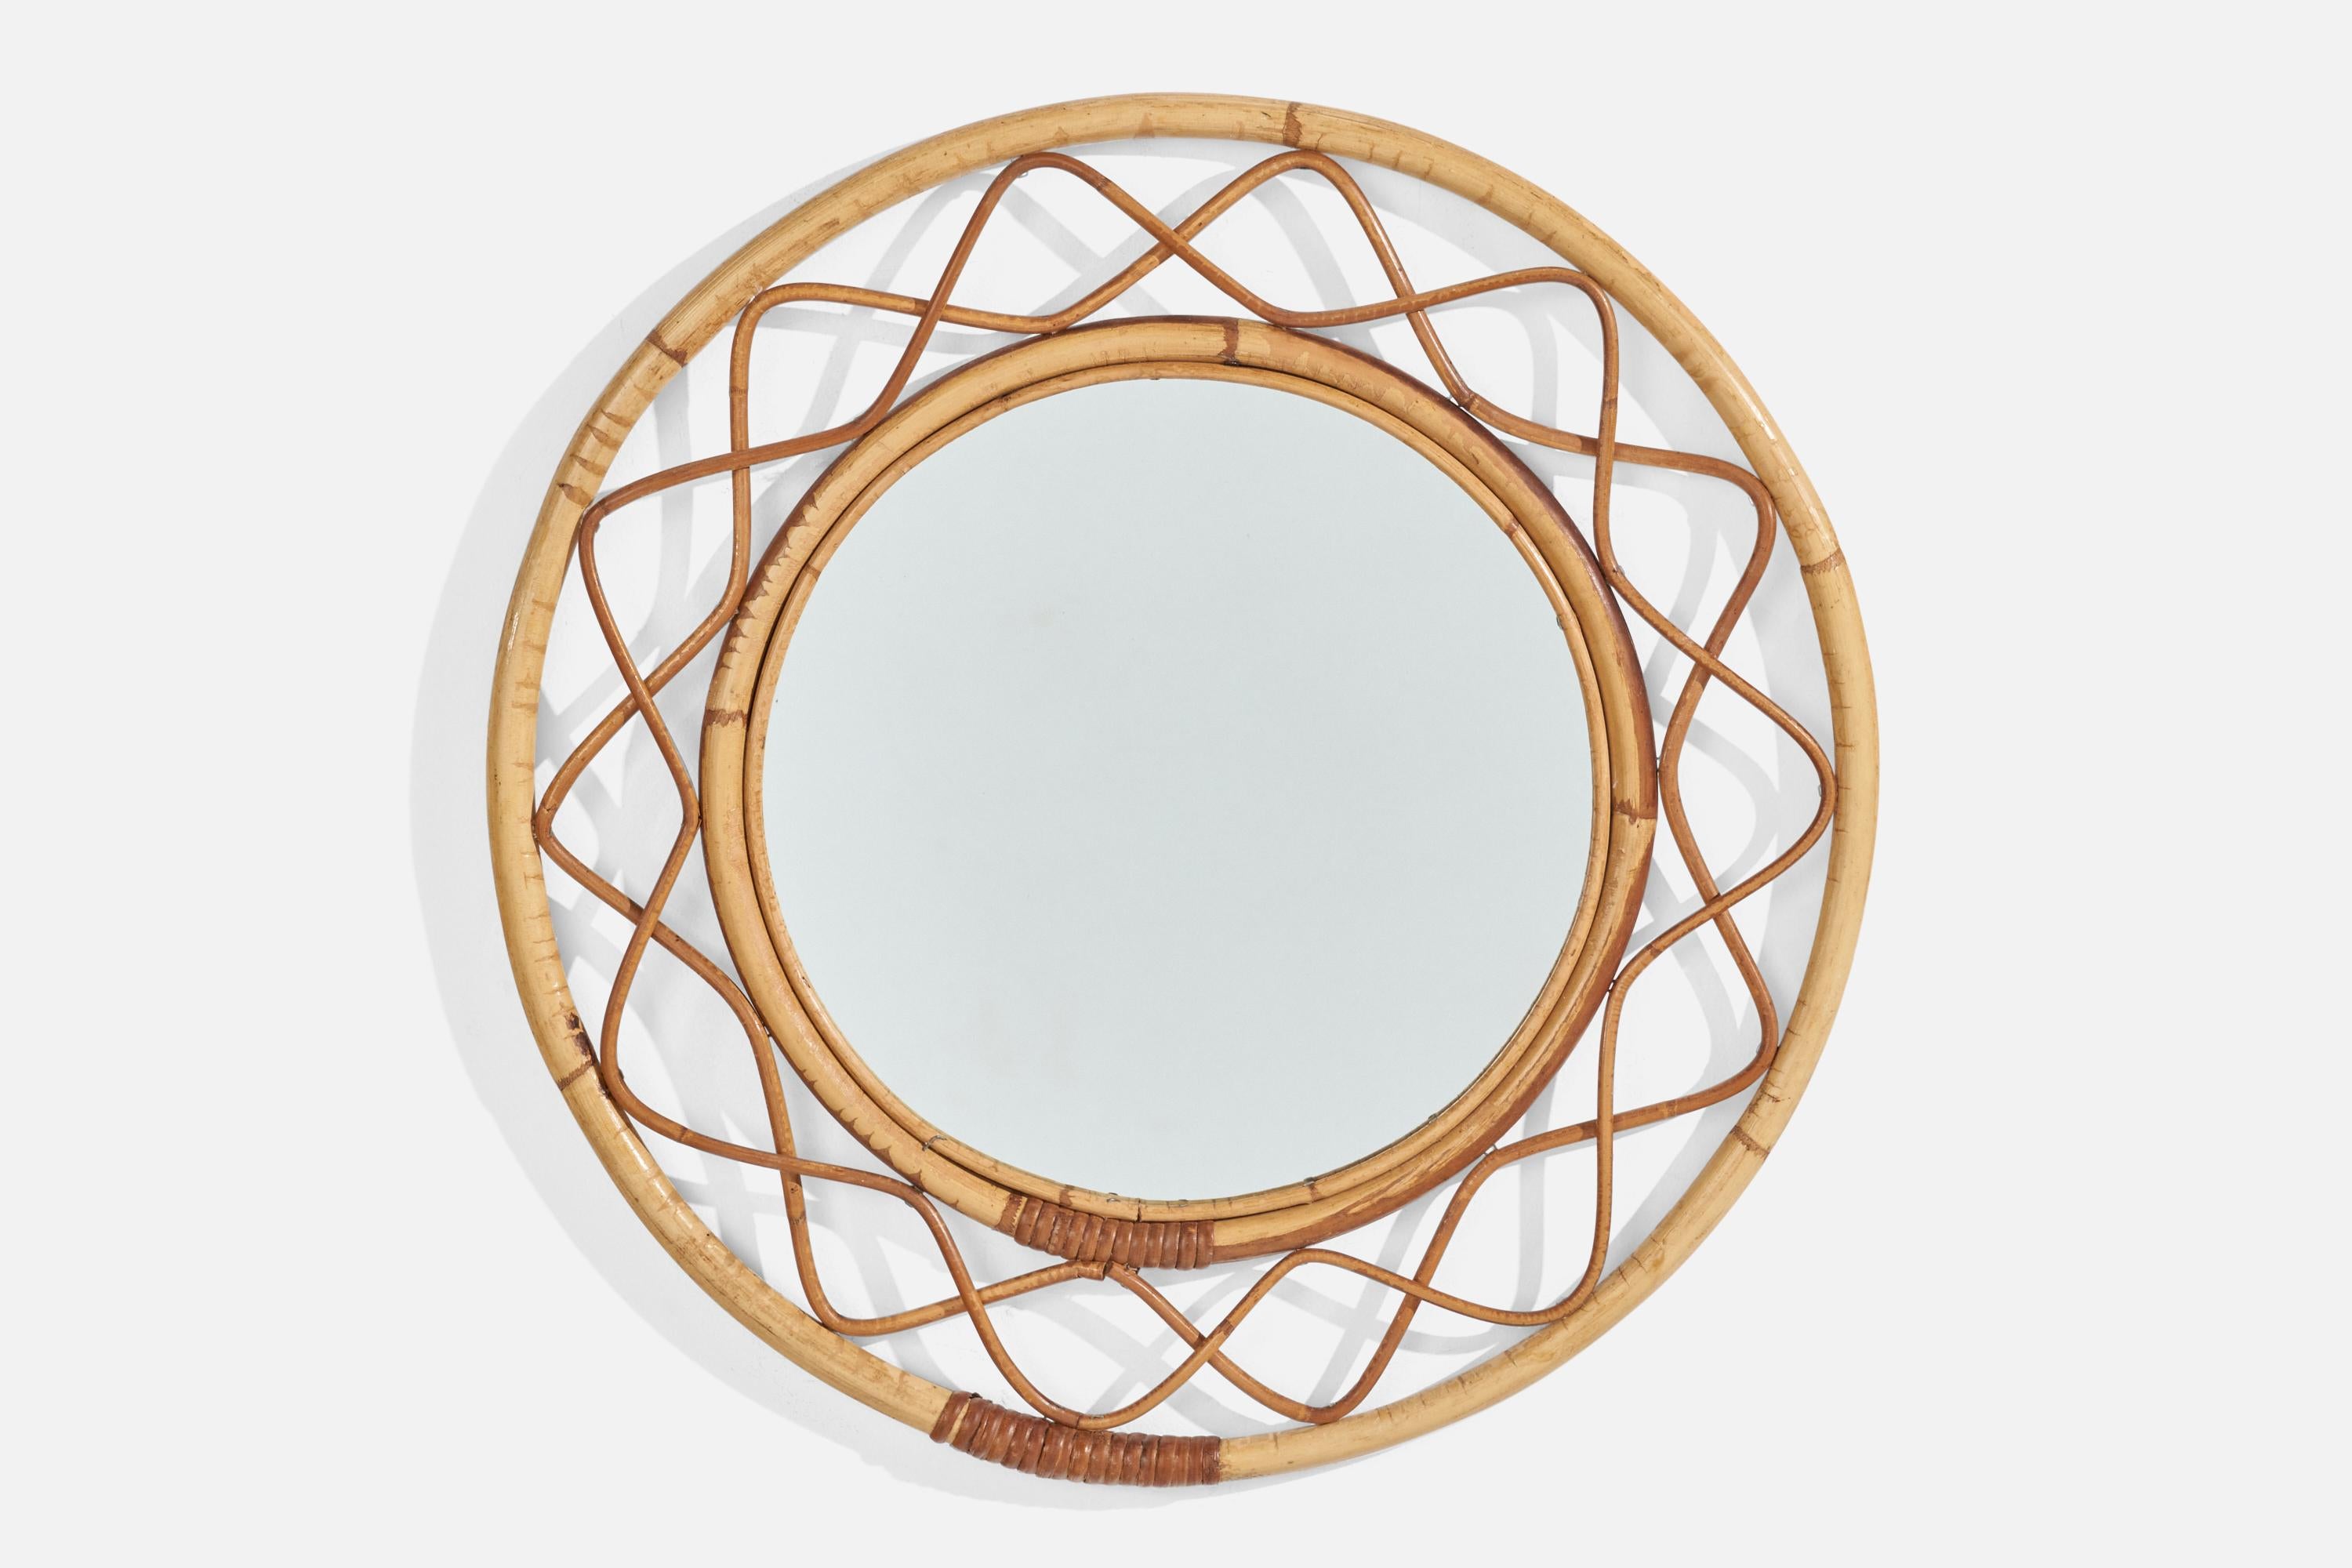 A bamboo and rattan wall mirror designed and produced by an Italian Designer, Italy, 1960s.